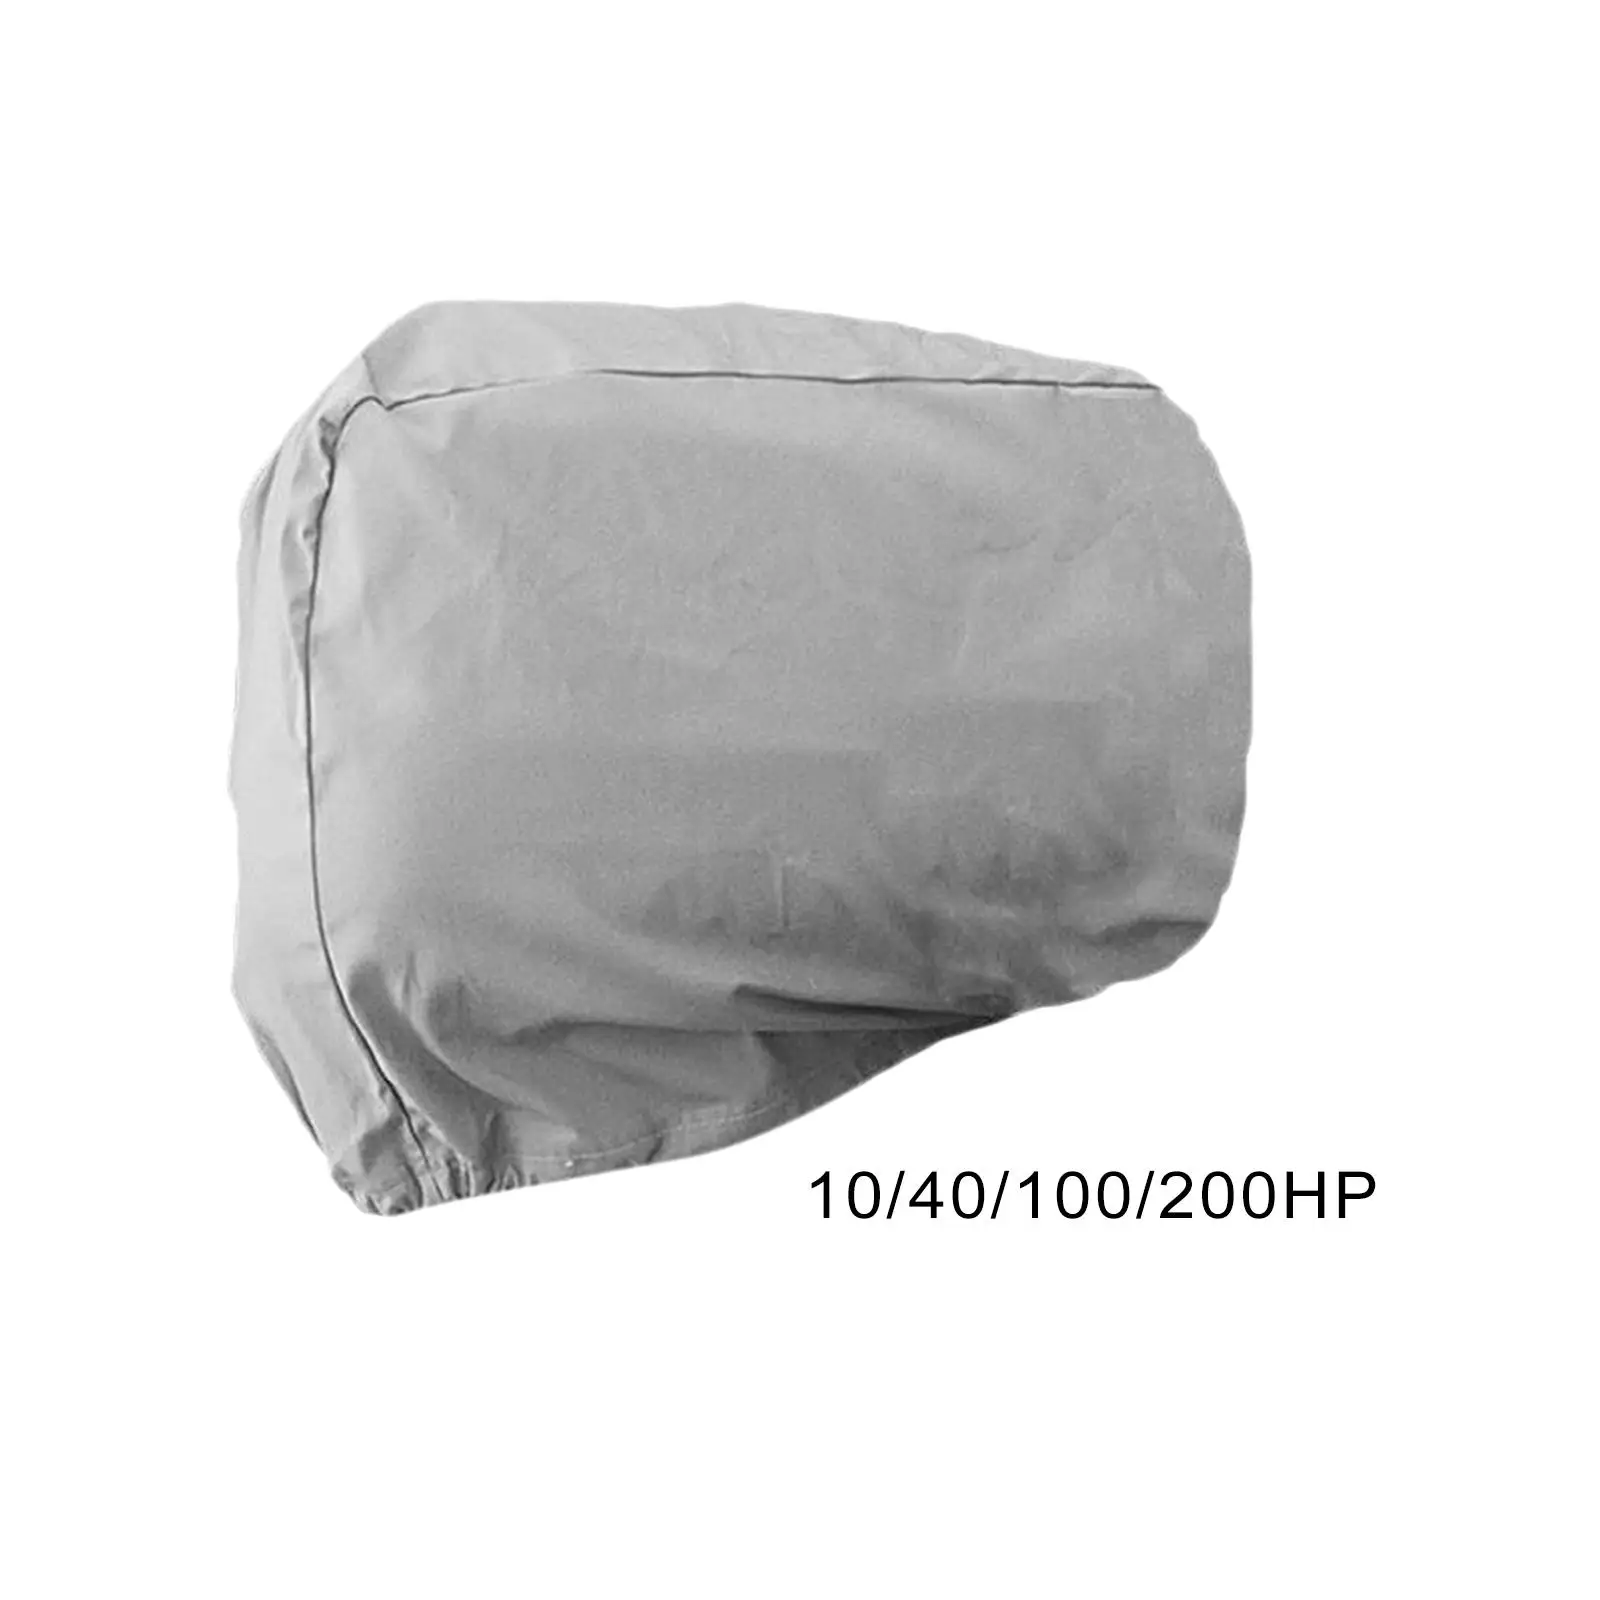 Outboard Motor Cover Silver Portable Boat Hood Covers for Sea Navigation